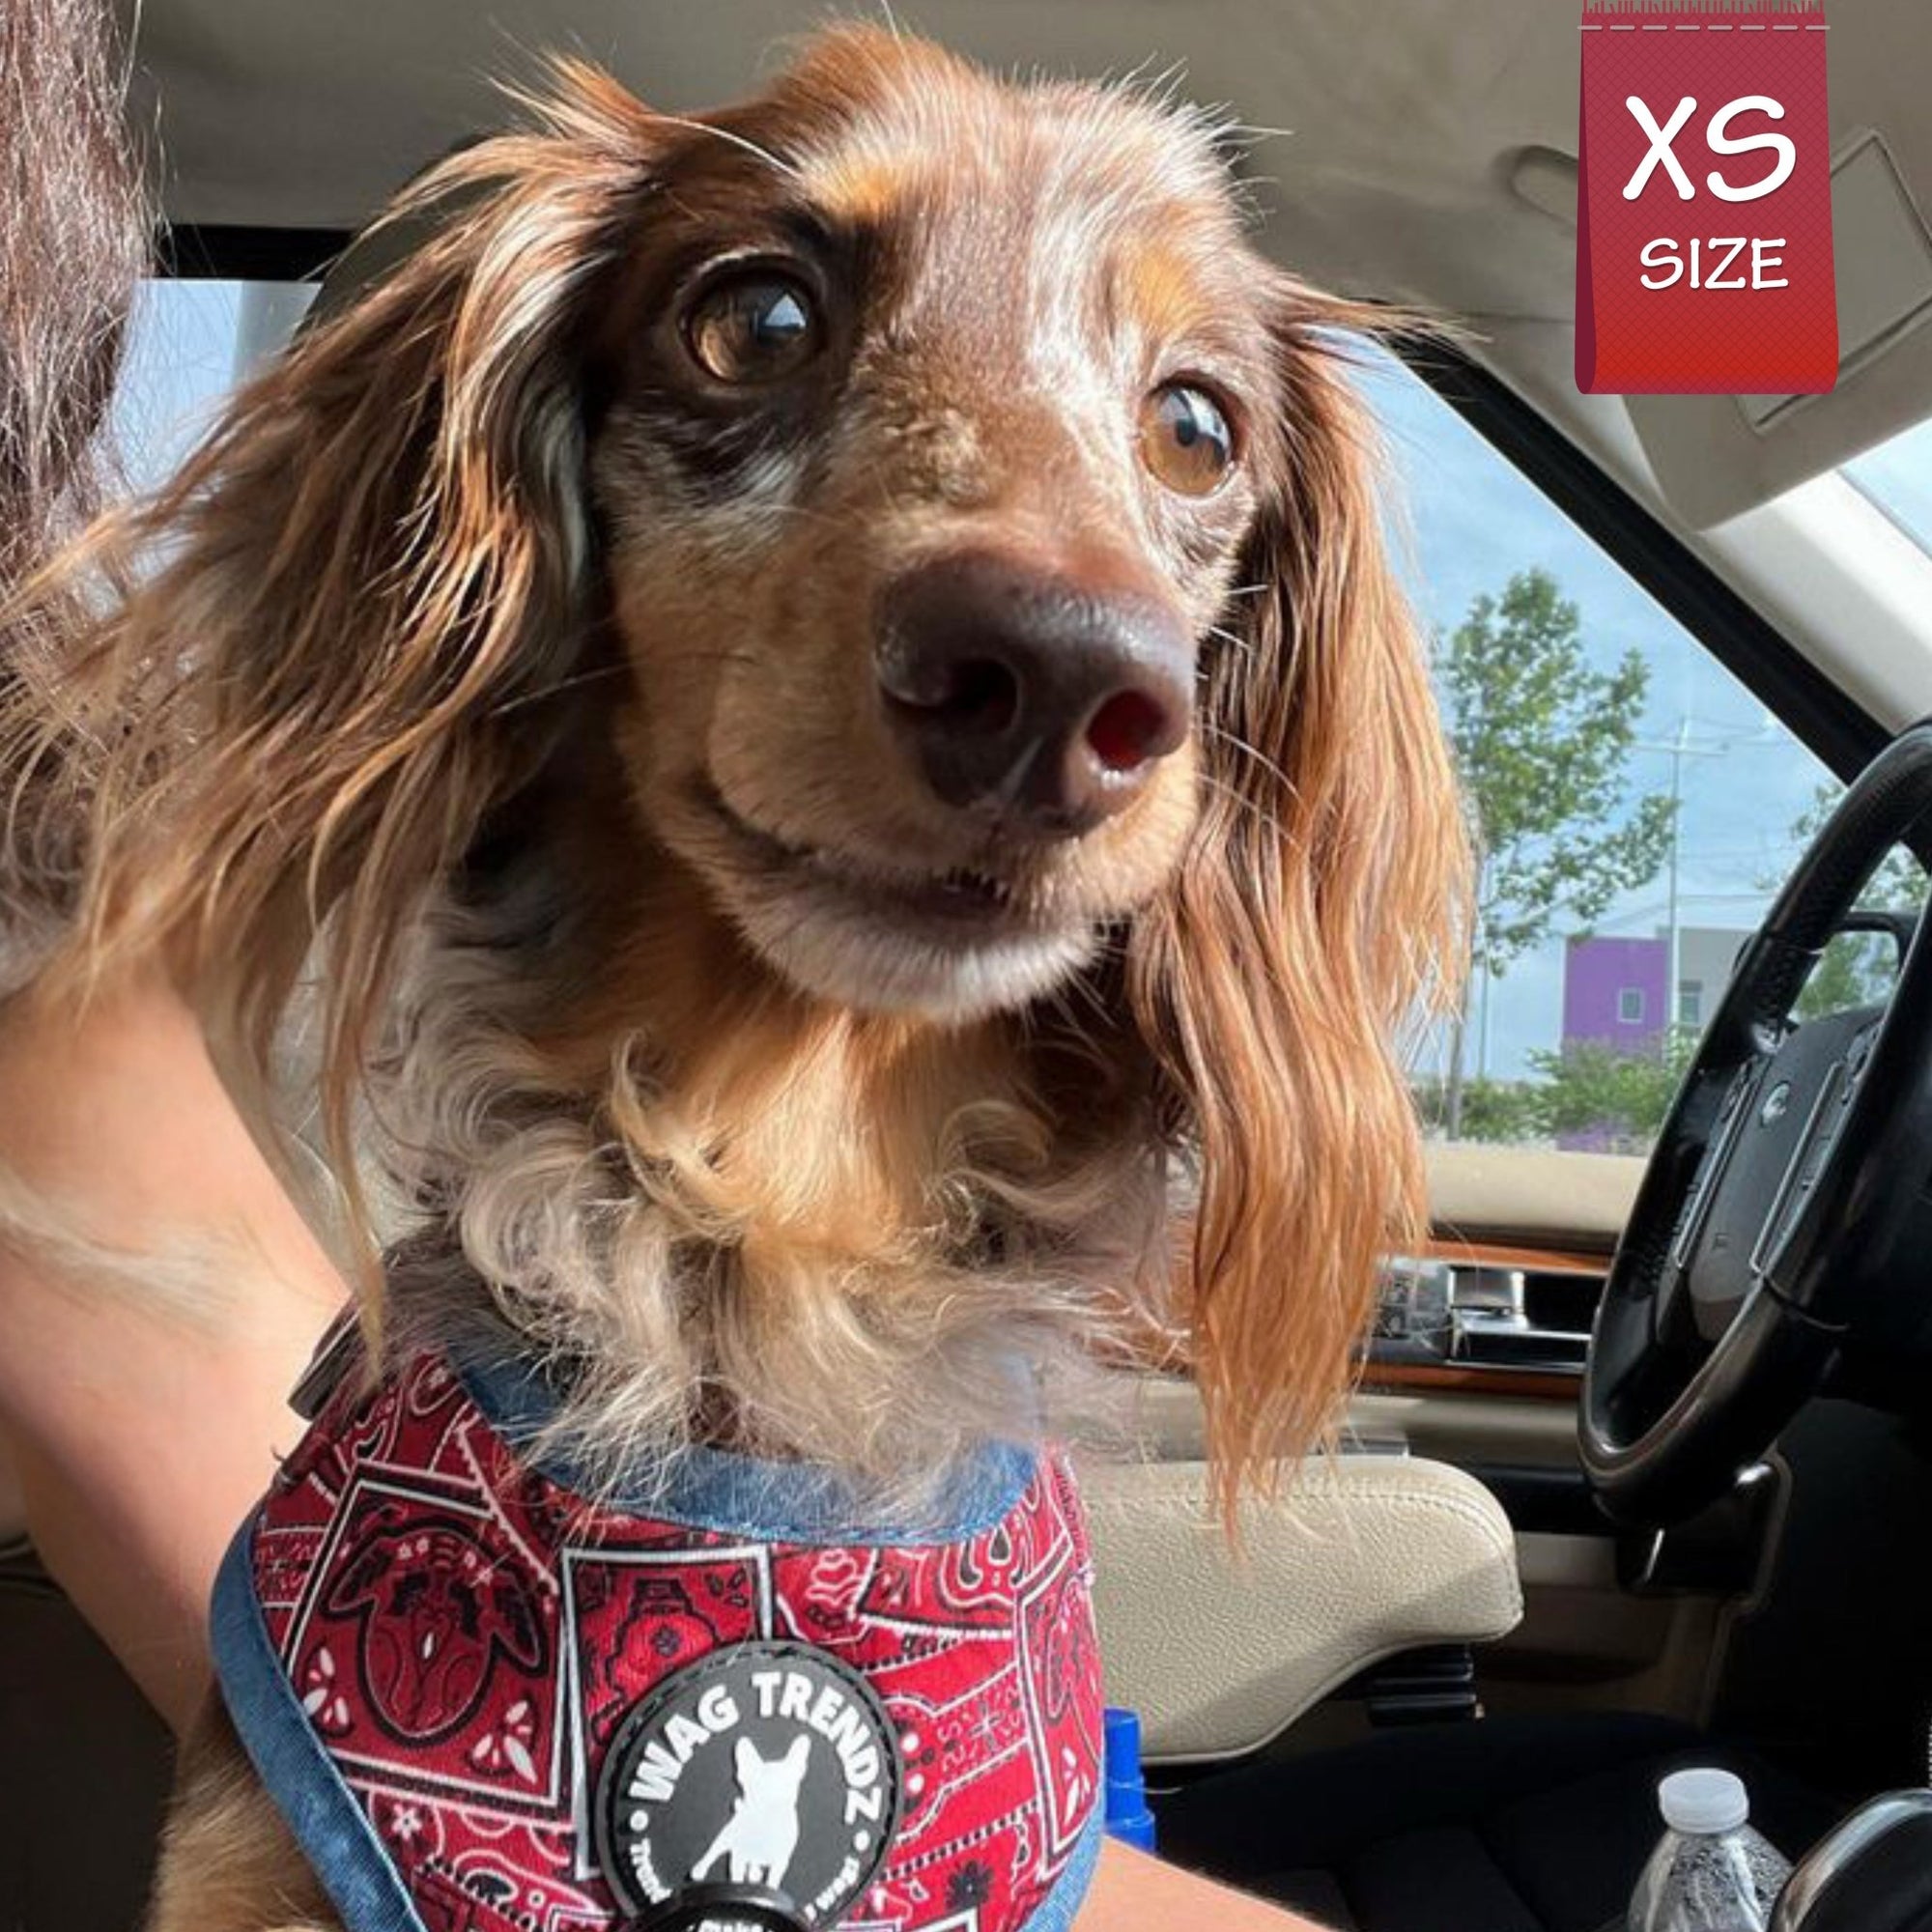 Dog Harness and Leash Set - Dachshund wearing Bandana Boujee Dog Harness in Red with Denim Accents - riding in car - Wag Trendz